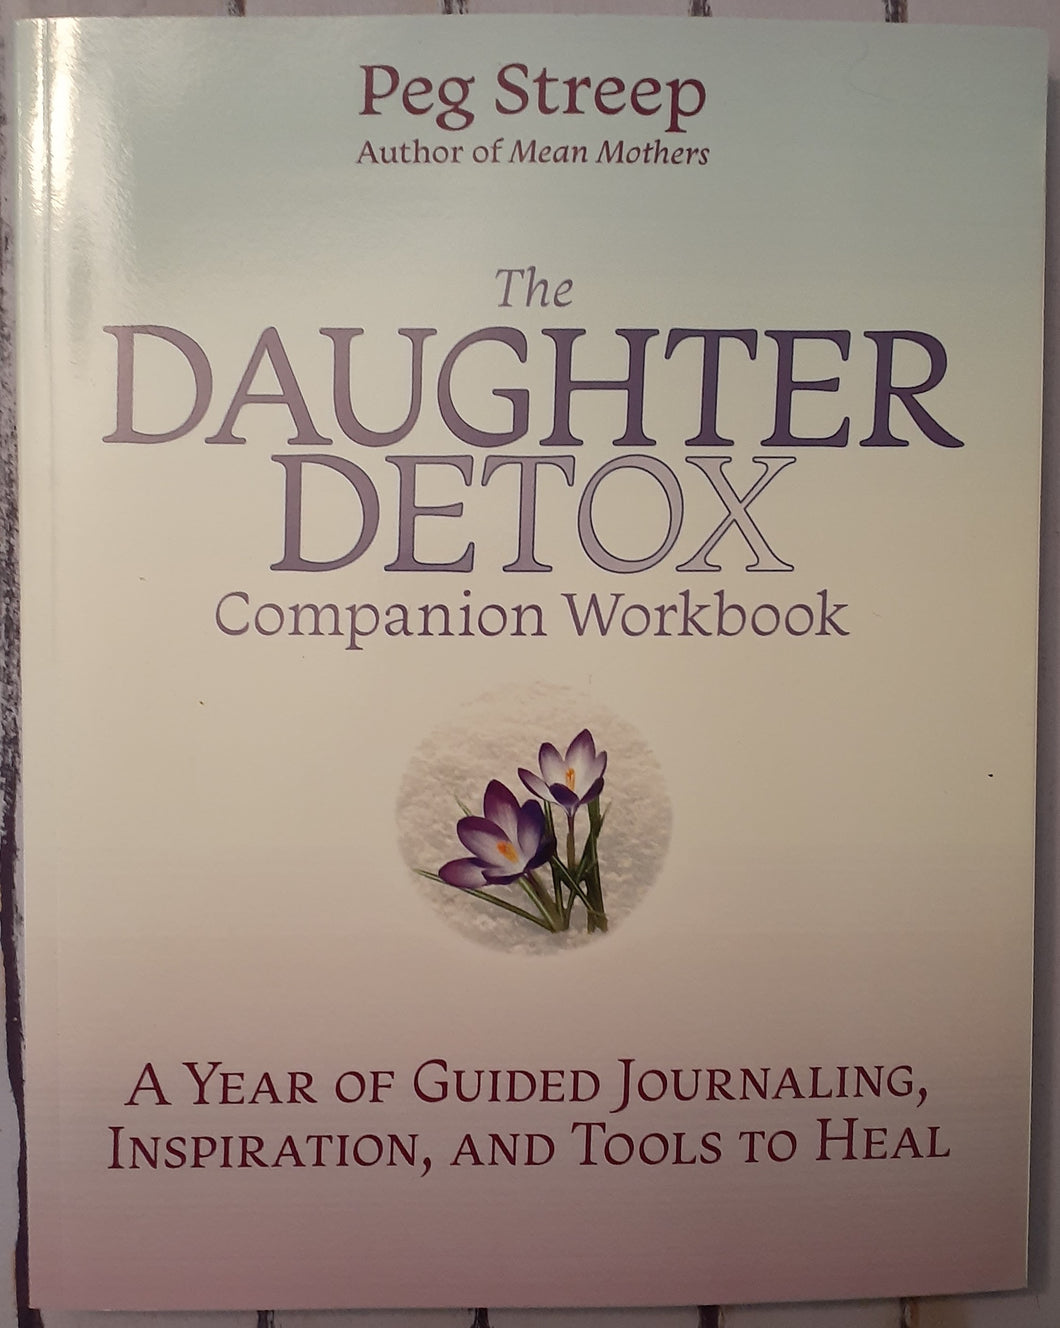 The Daughter Detox Companion Workbook: A Year if Guided Journaling, Inspiration, and Tools to Heal